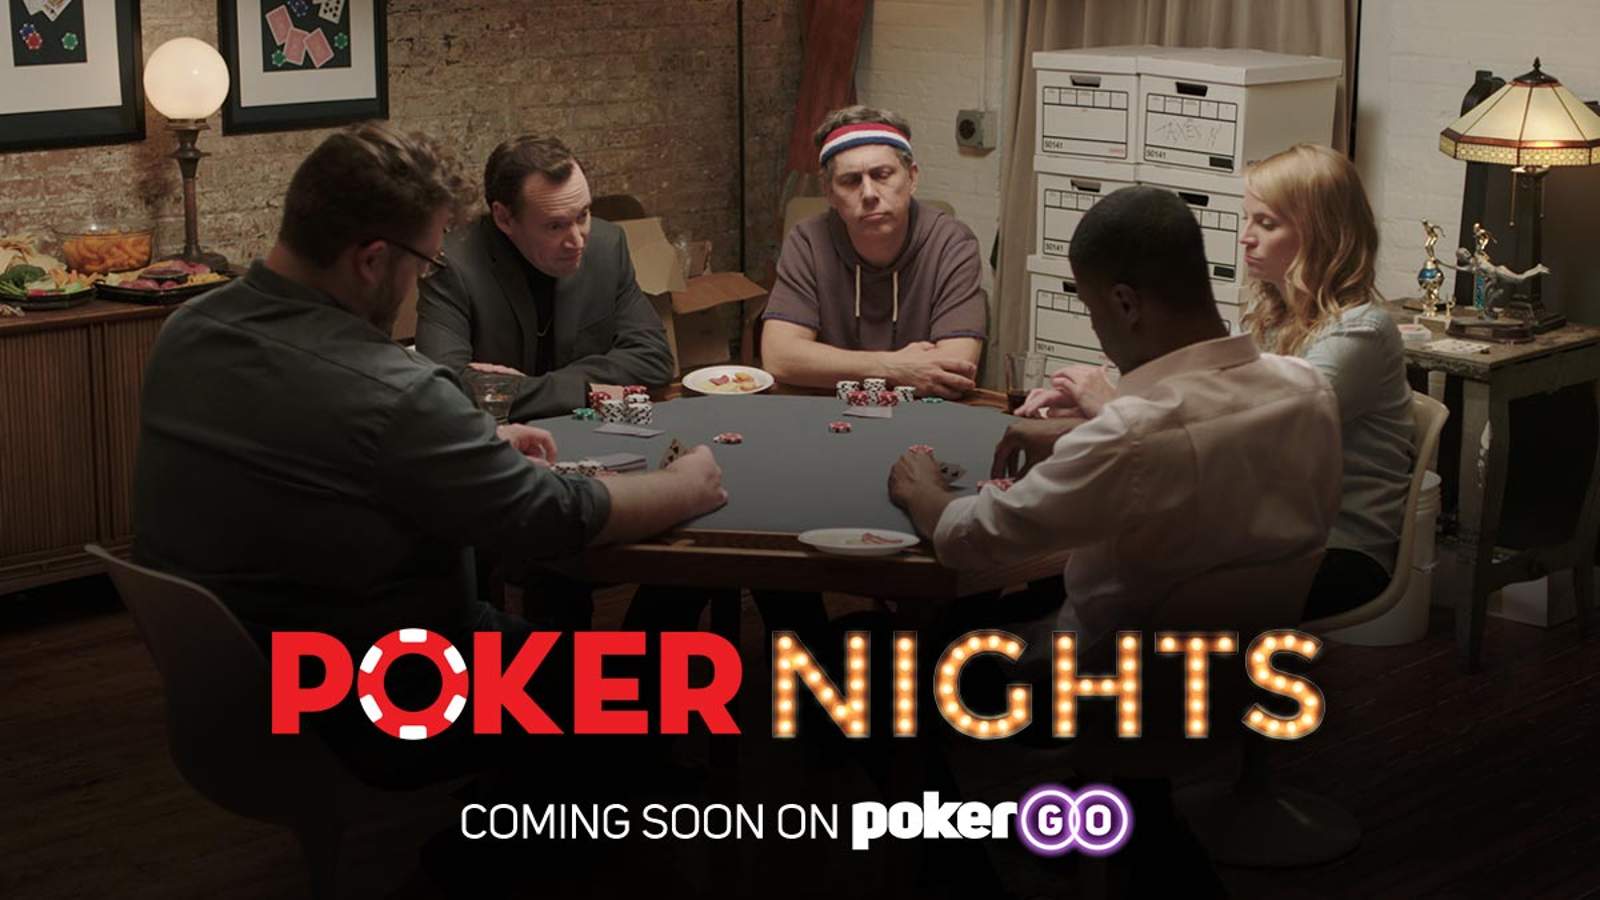 "Poker Nights" to Premiere on PokerGO Later This Summer